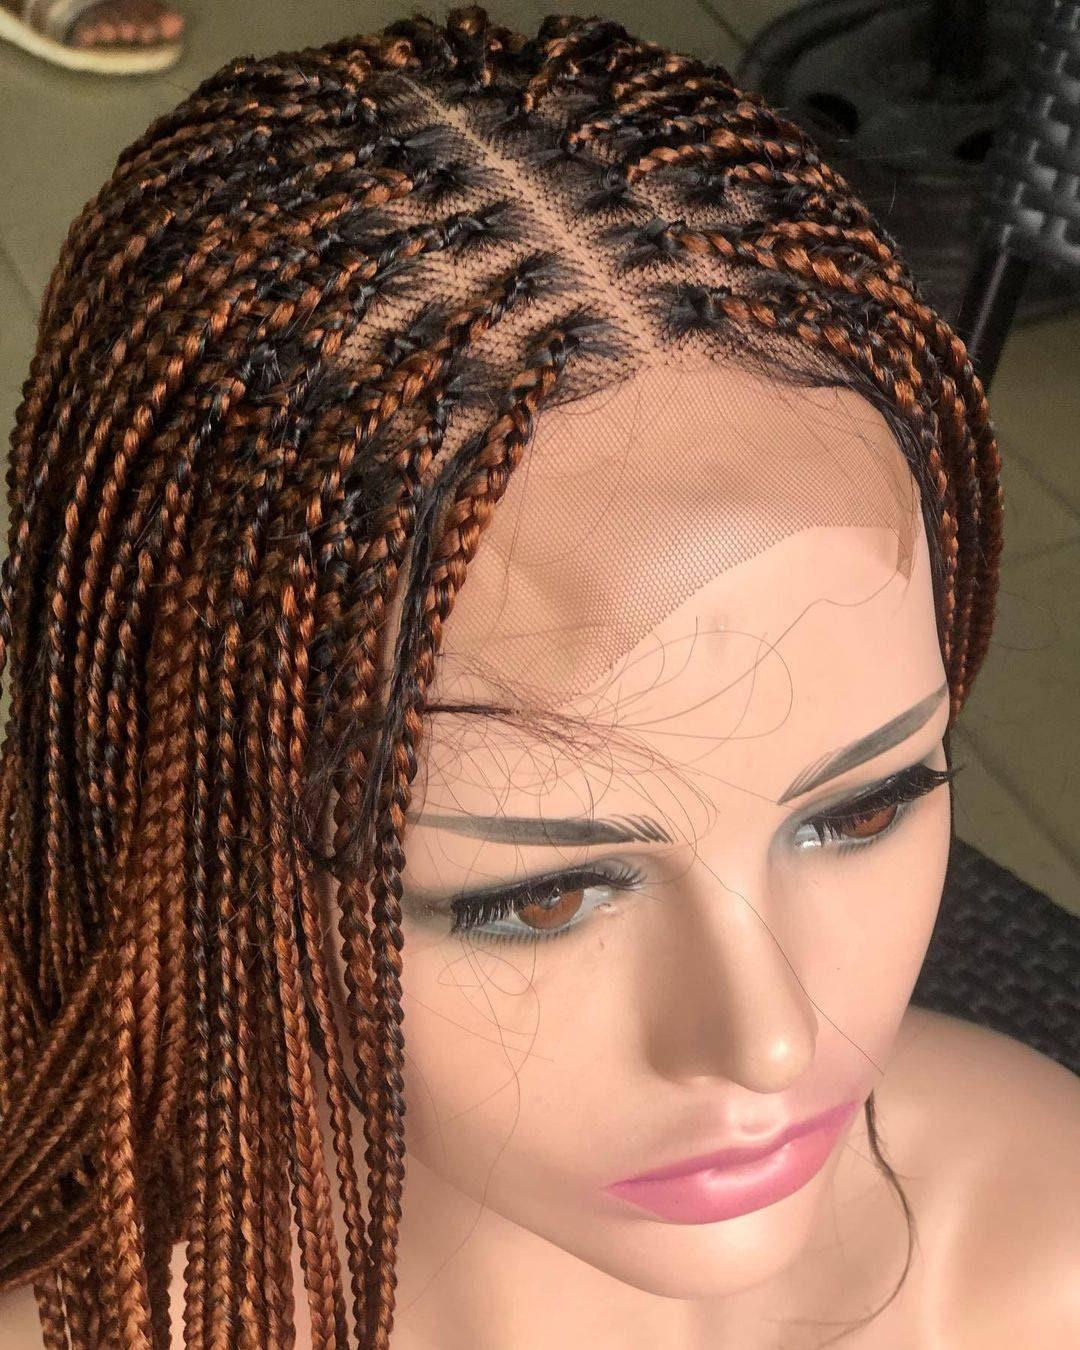 Knotless braids on a closure Braided wig braided lace front wigs Human hair wigs cornrow braided wig for black women braid wig knotless wig